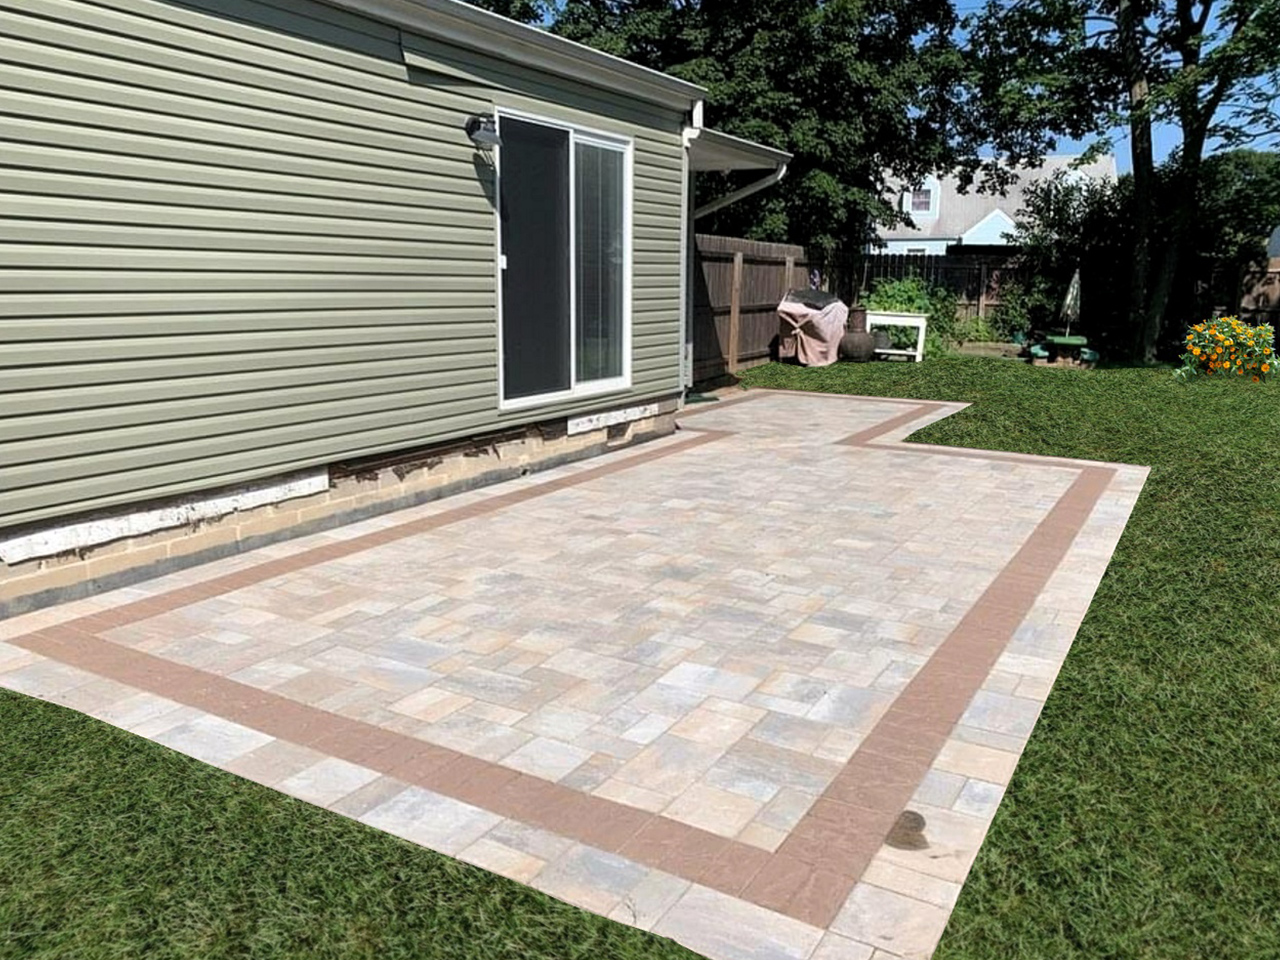 An exquisitely constructed patio by Affordable Patio, featuring a harmonious combination of stone and wood.